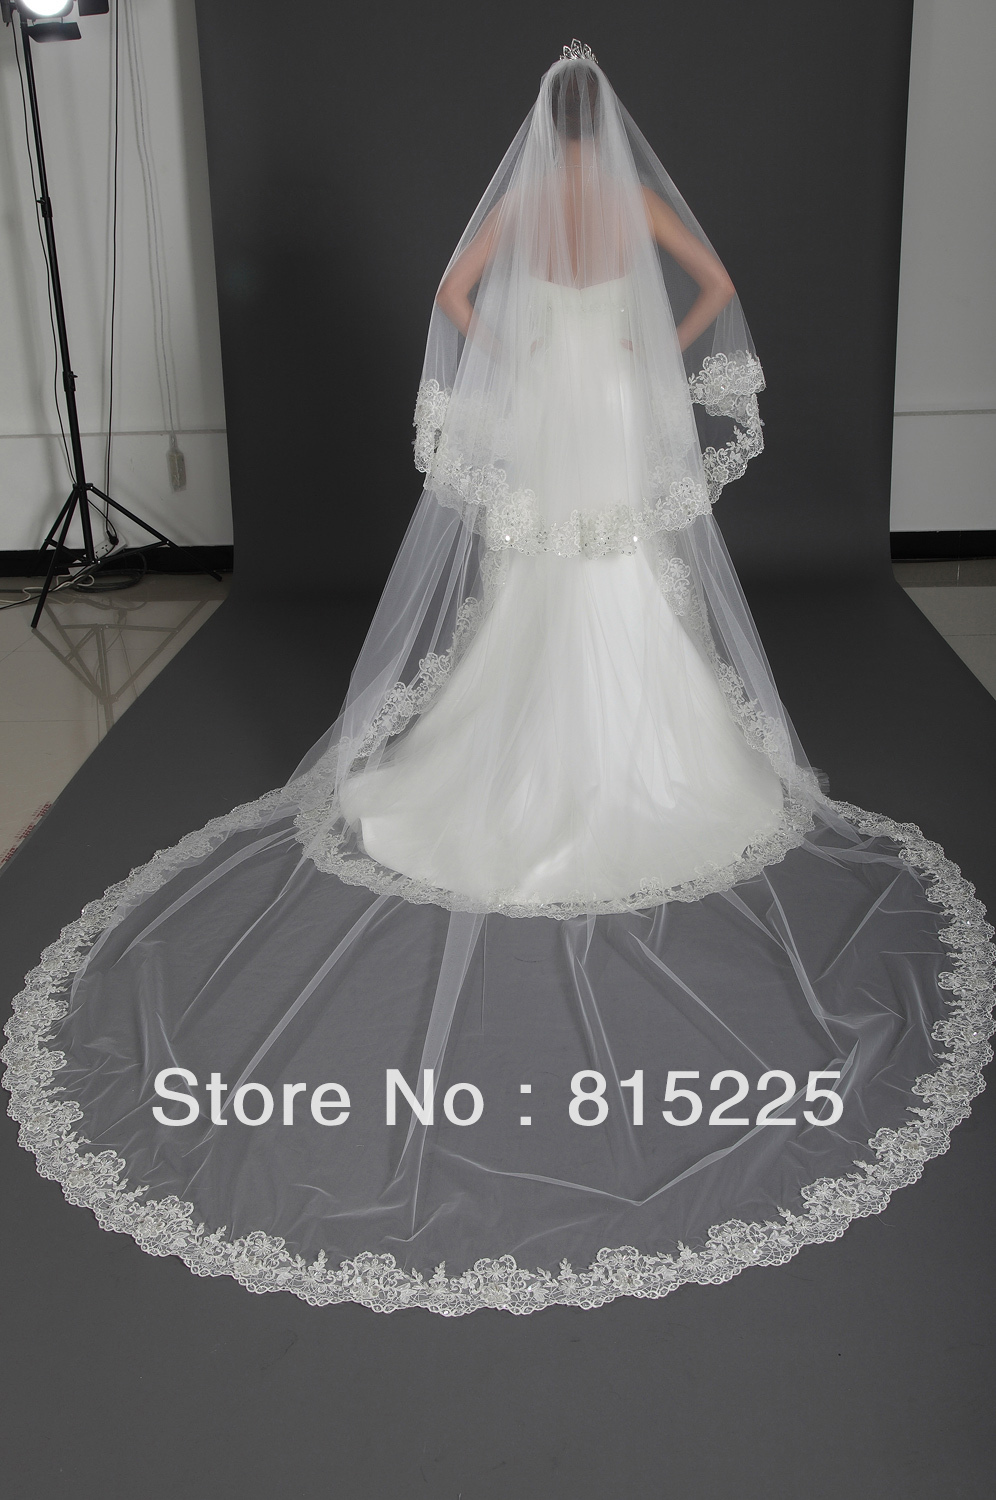 Tempting Empire Upscale Wedding Veils Bridal Veils Accessories Decoration Two Layer White Cathedral Veil Long Veil  Custom Made